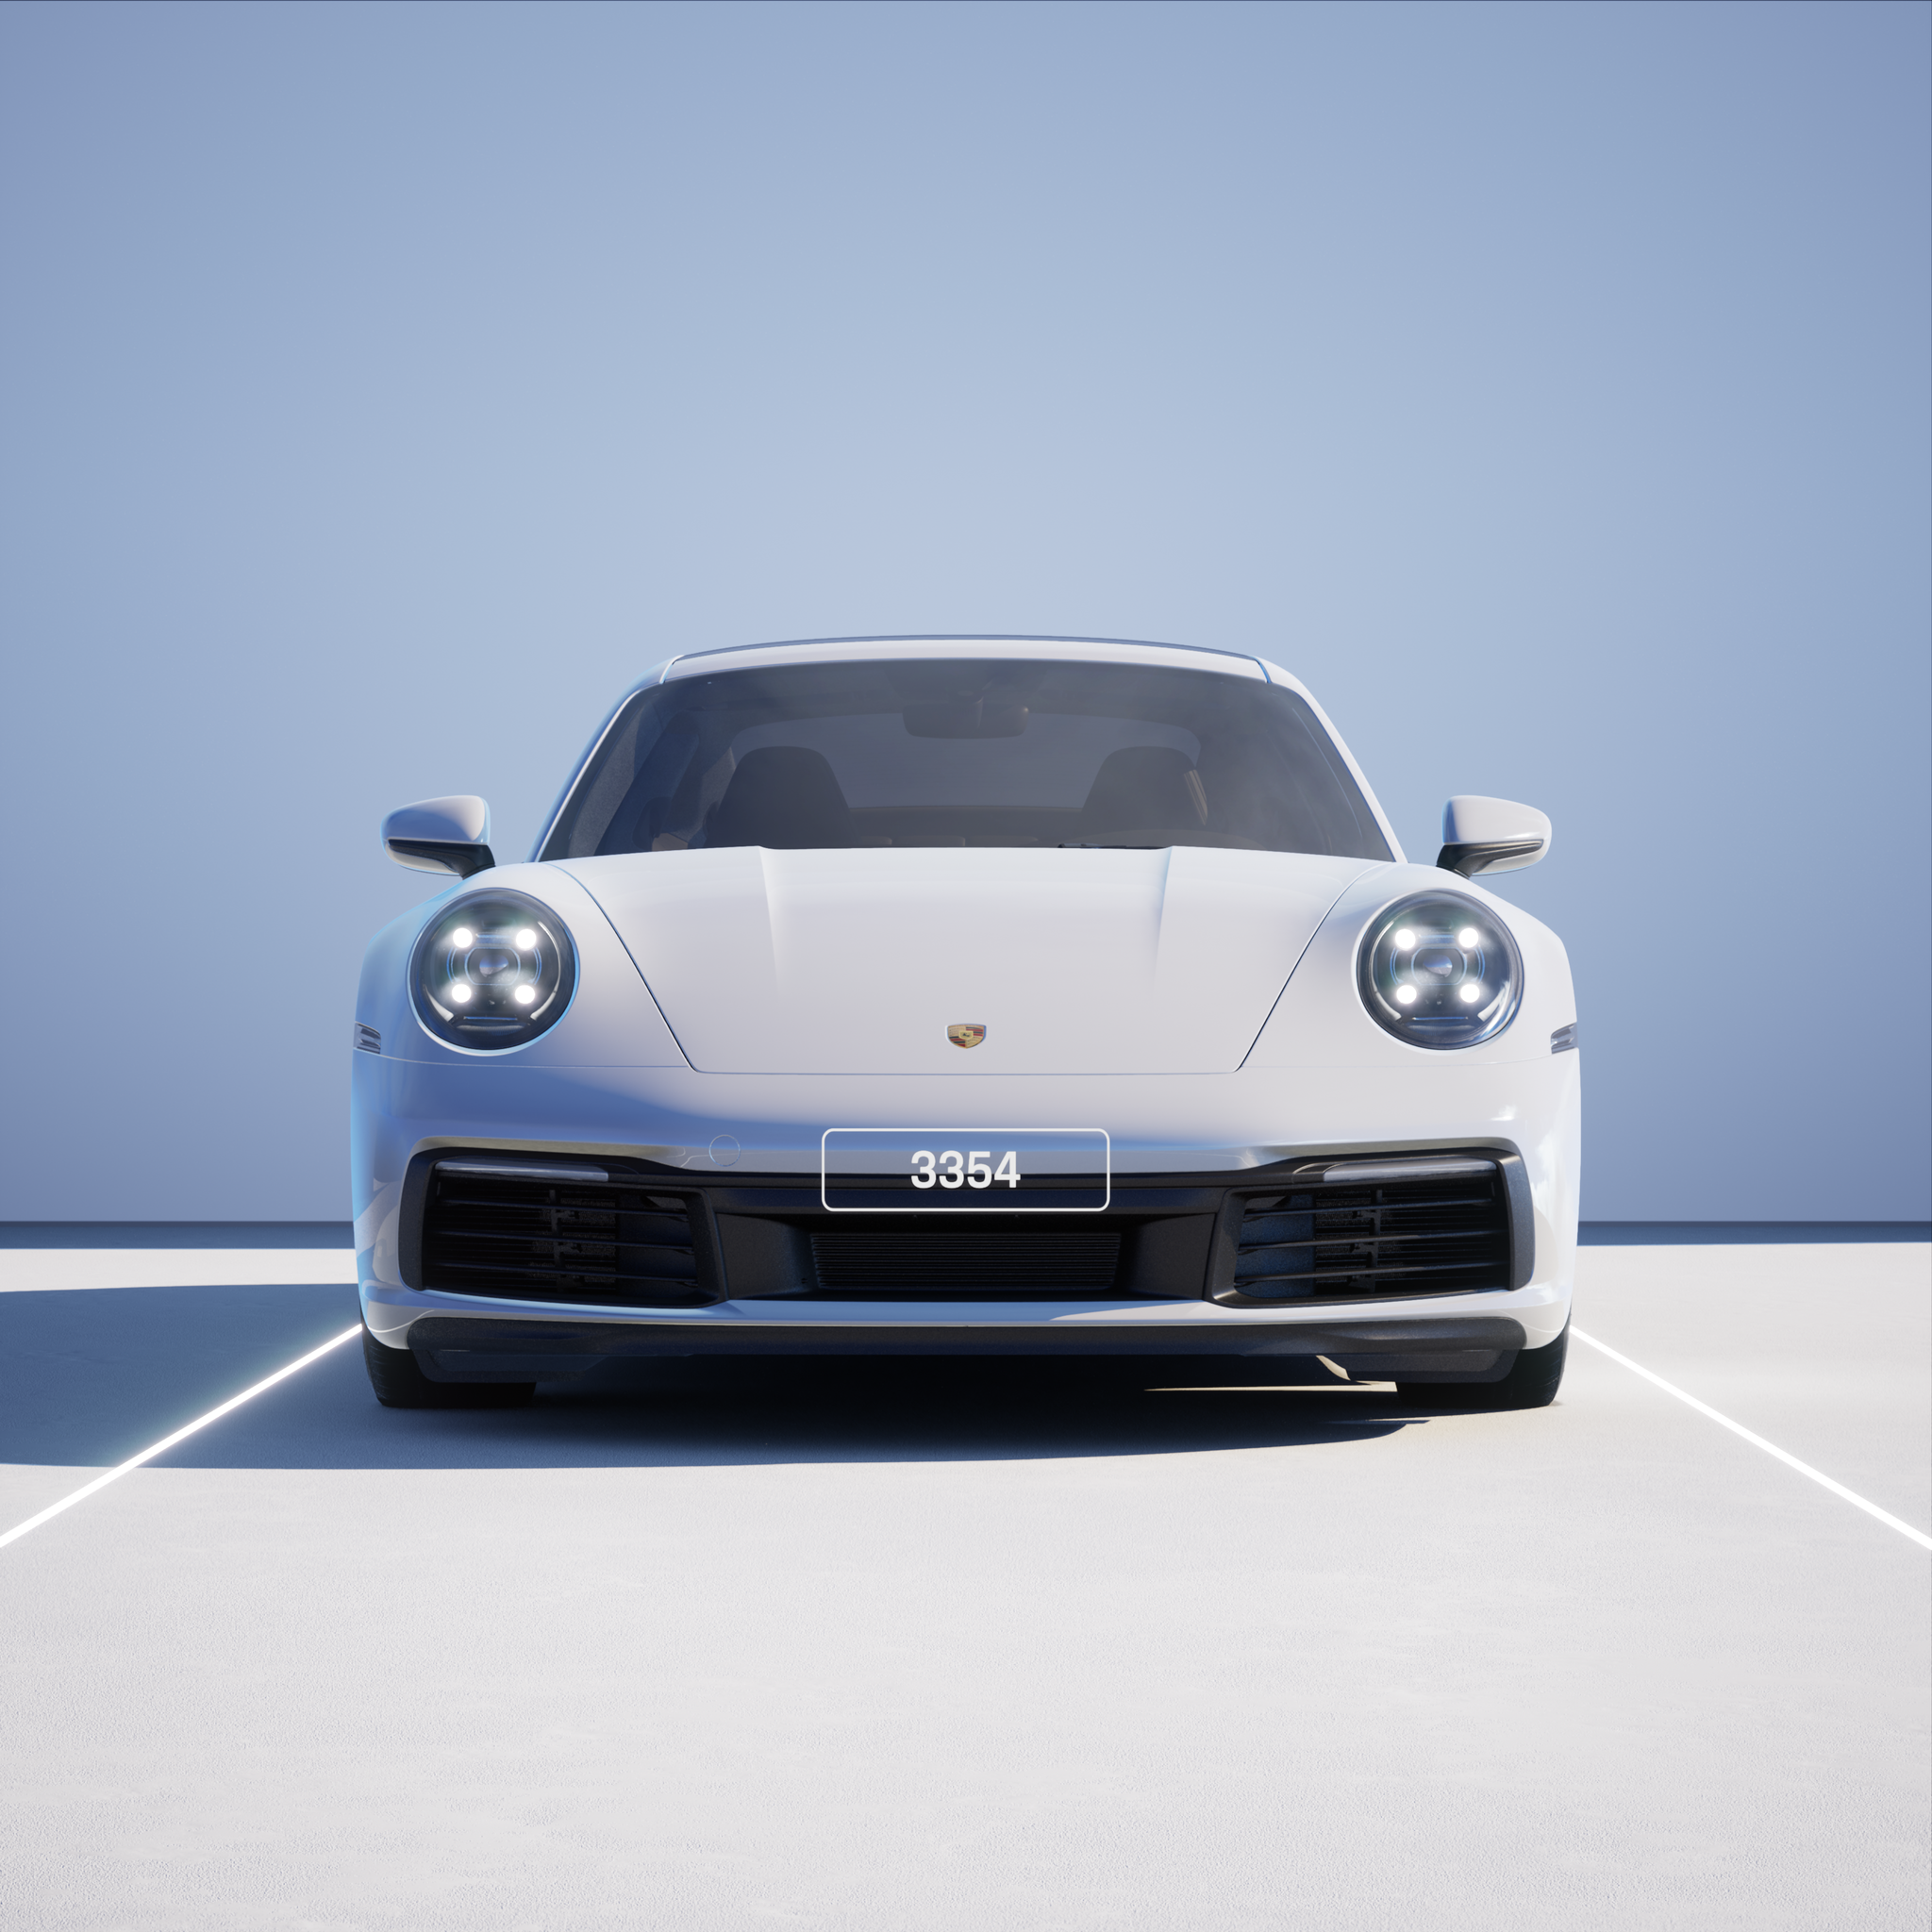 The PORSCHΞ 911 3354 image in phase